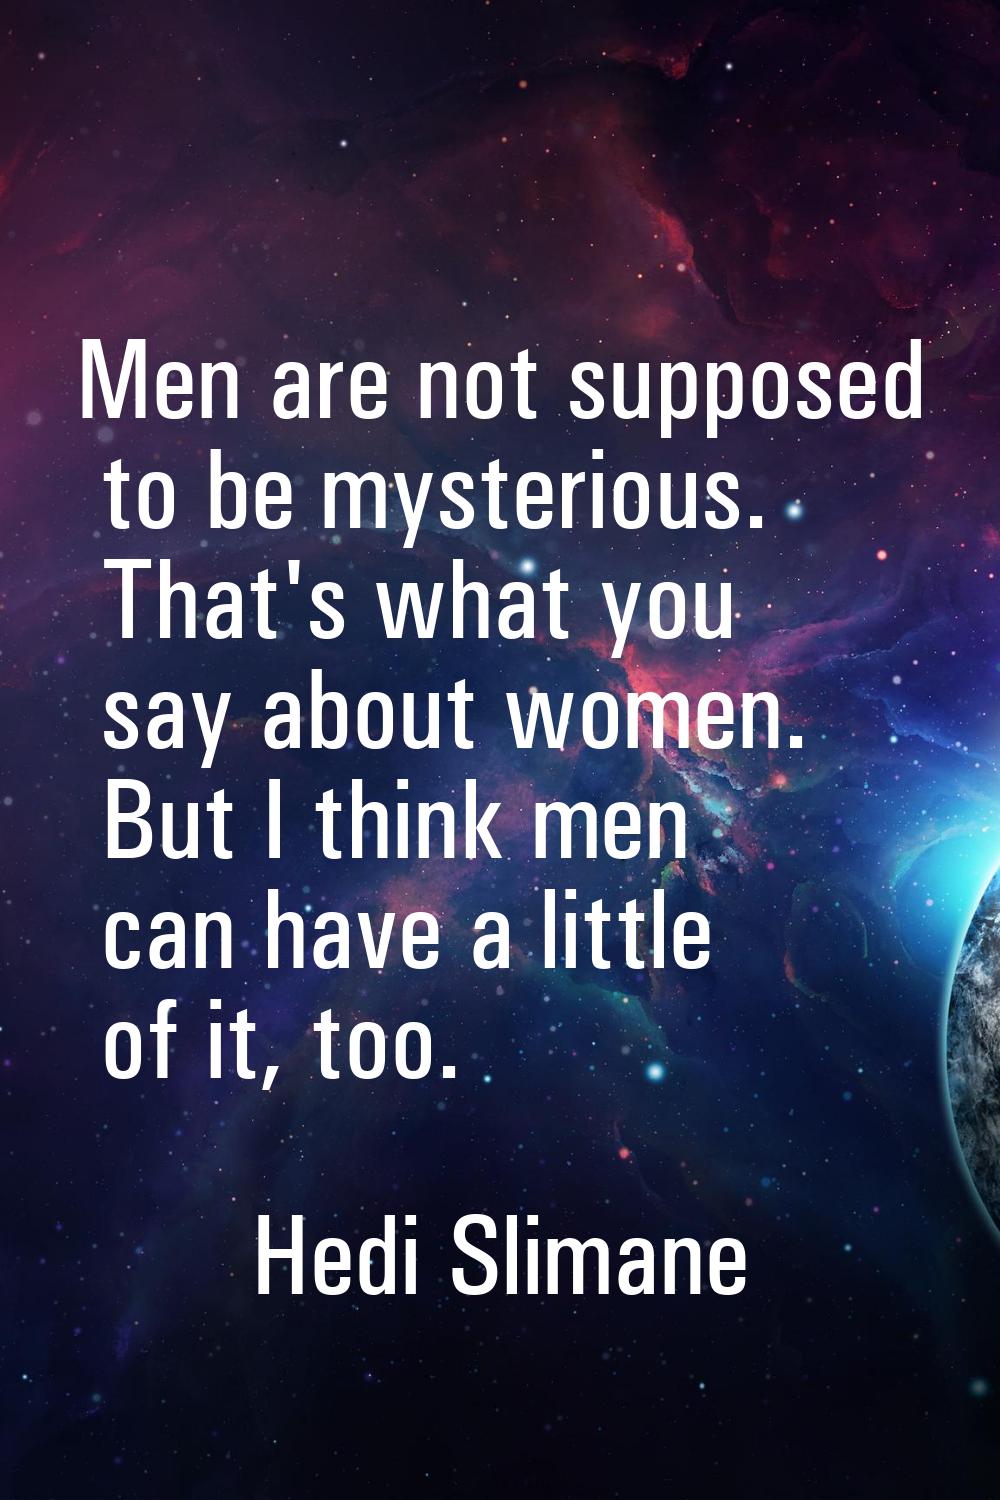 Men are not supposed to be mysterious. That's what you say about women. But I think men can have a 